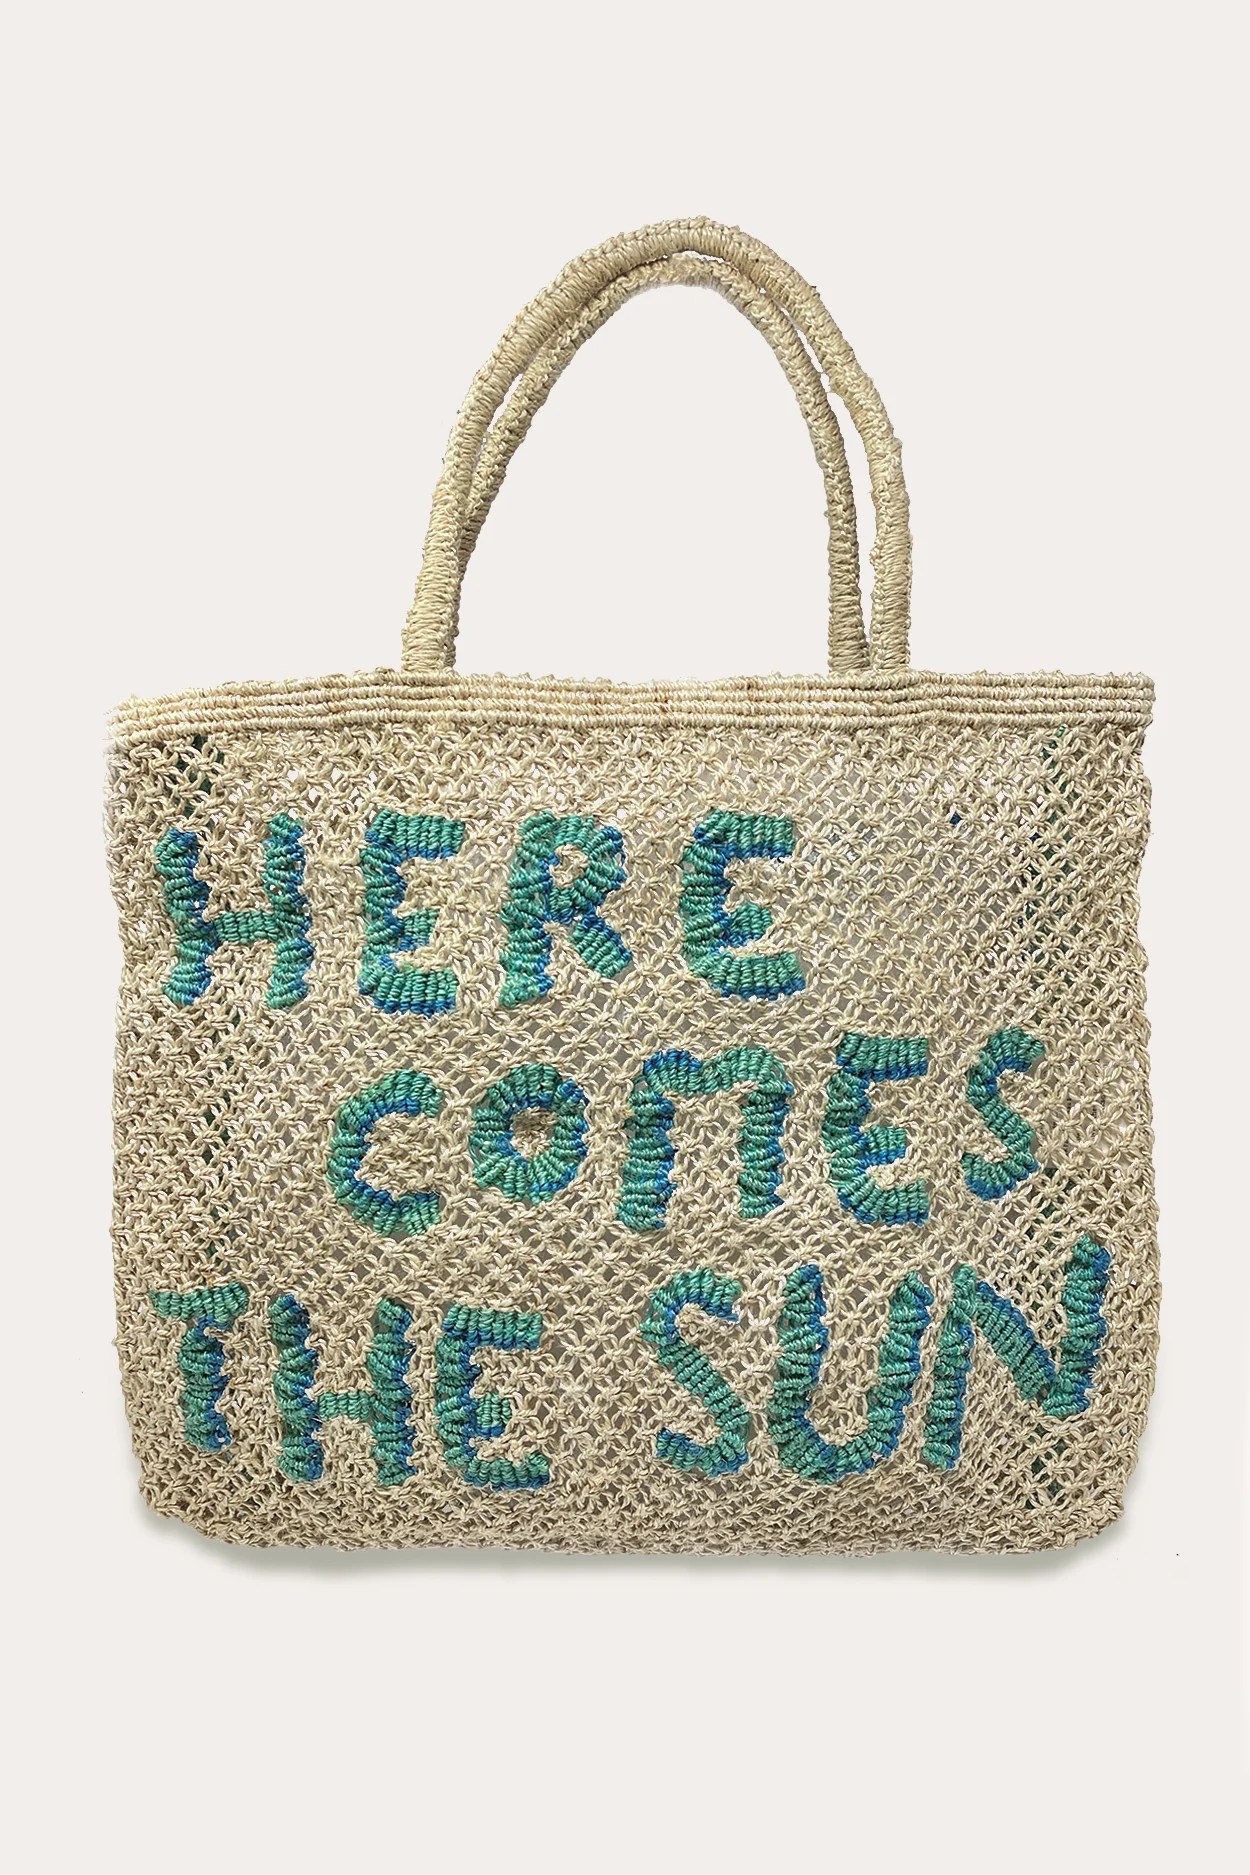 The Best Beach Bags and Totes for a Day in the Sun (and Sand)